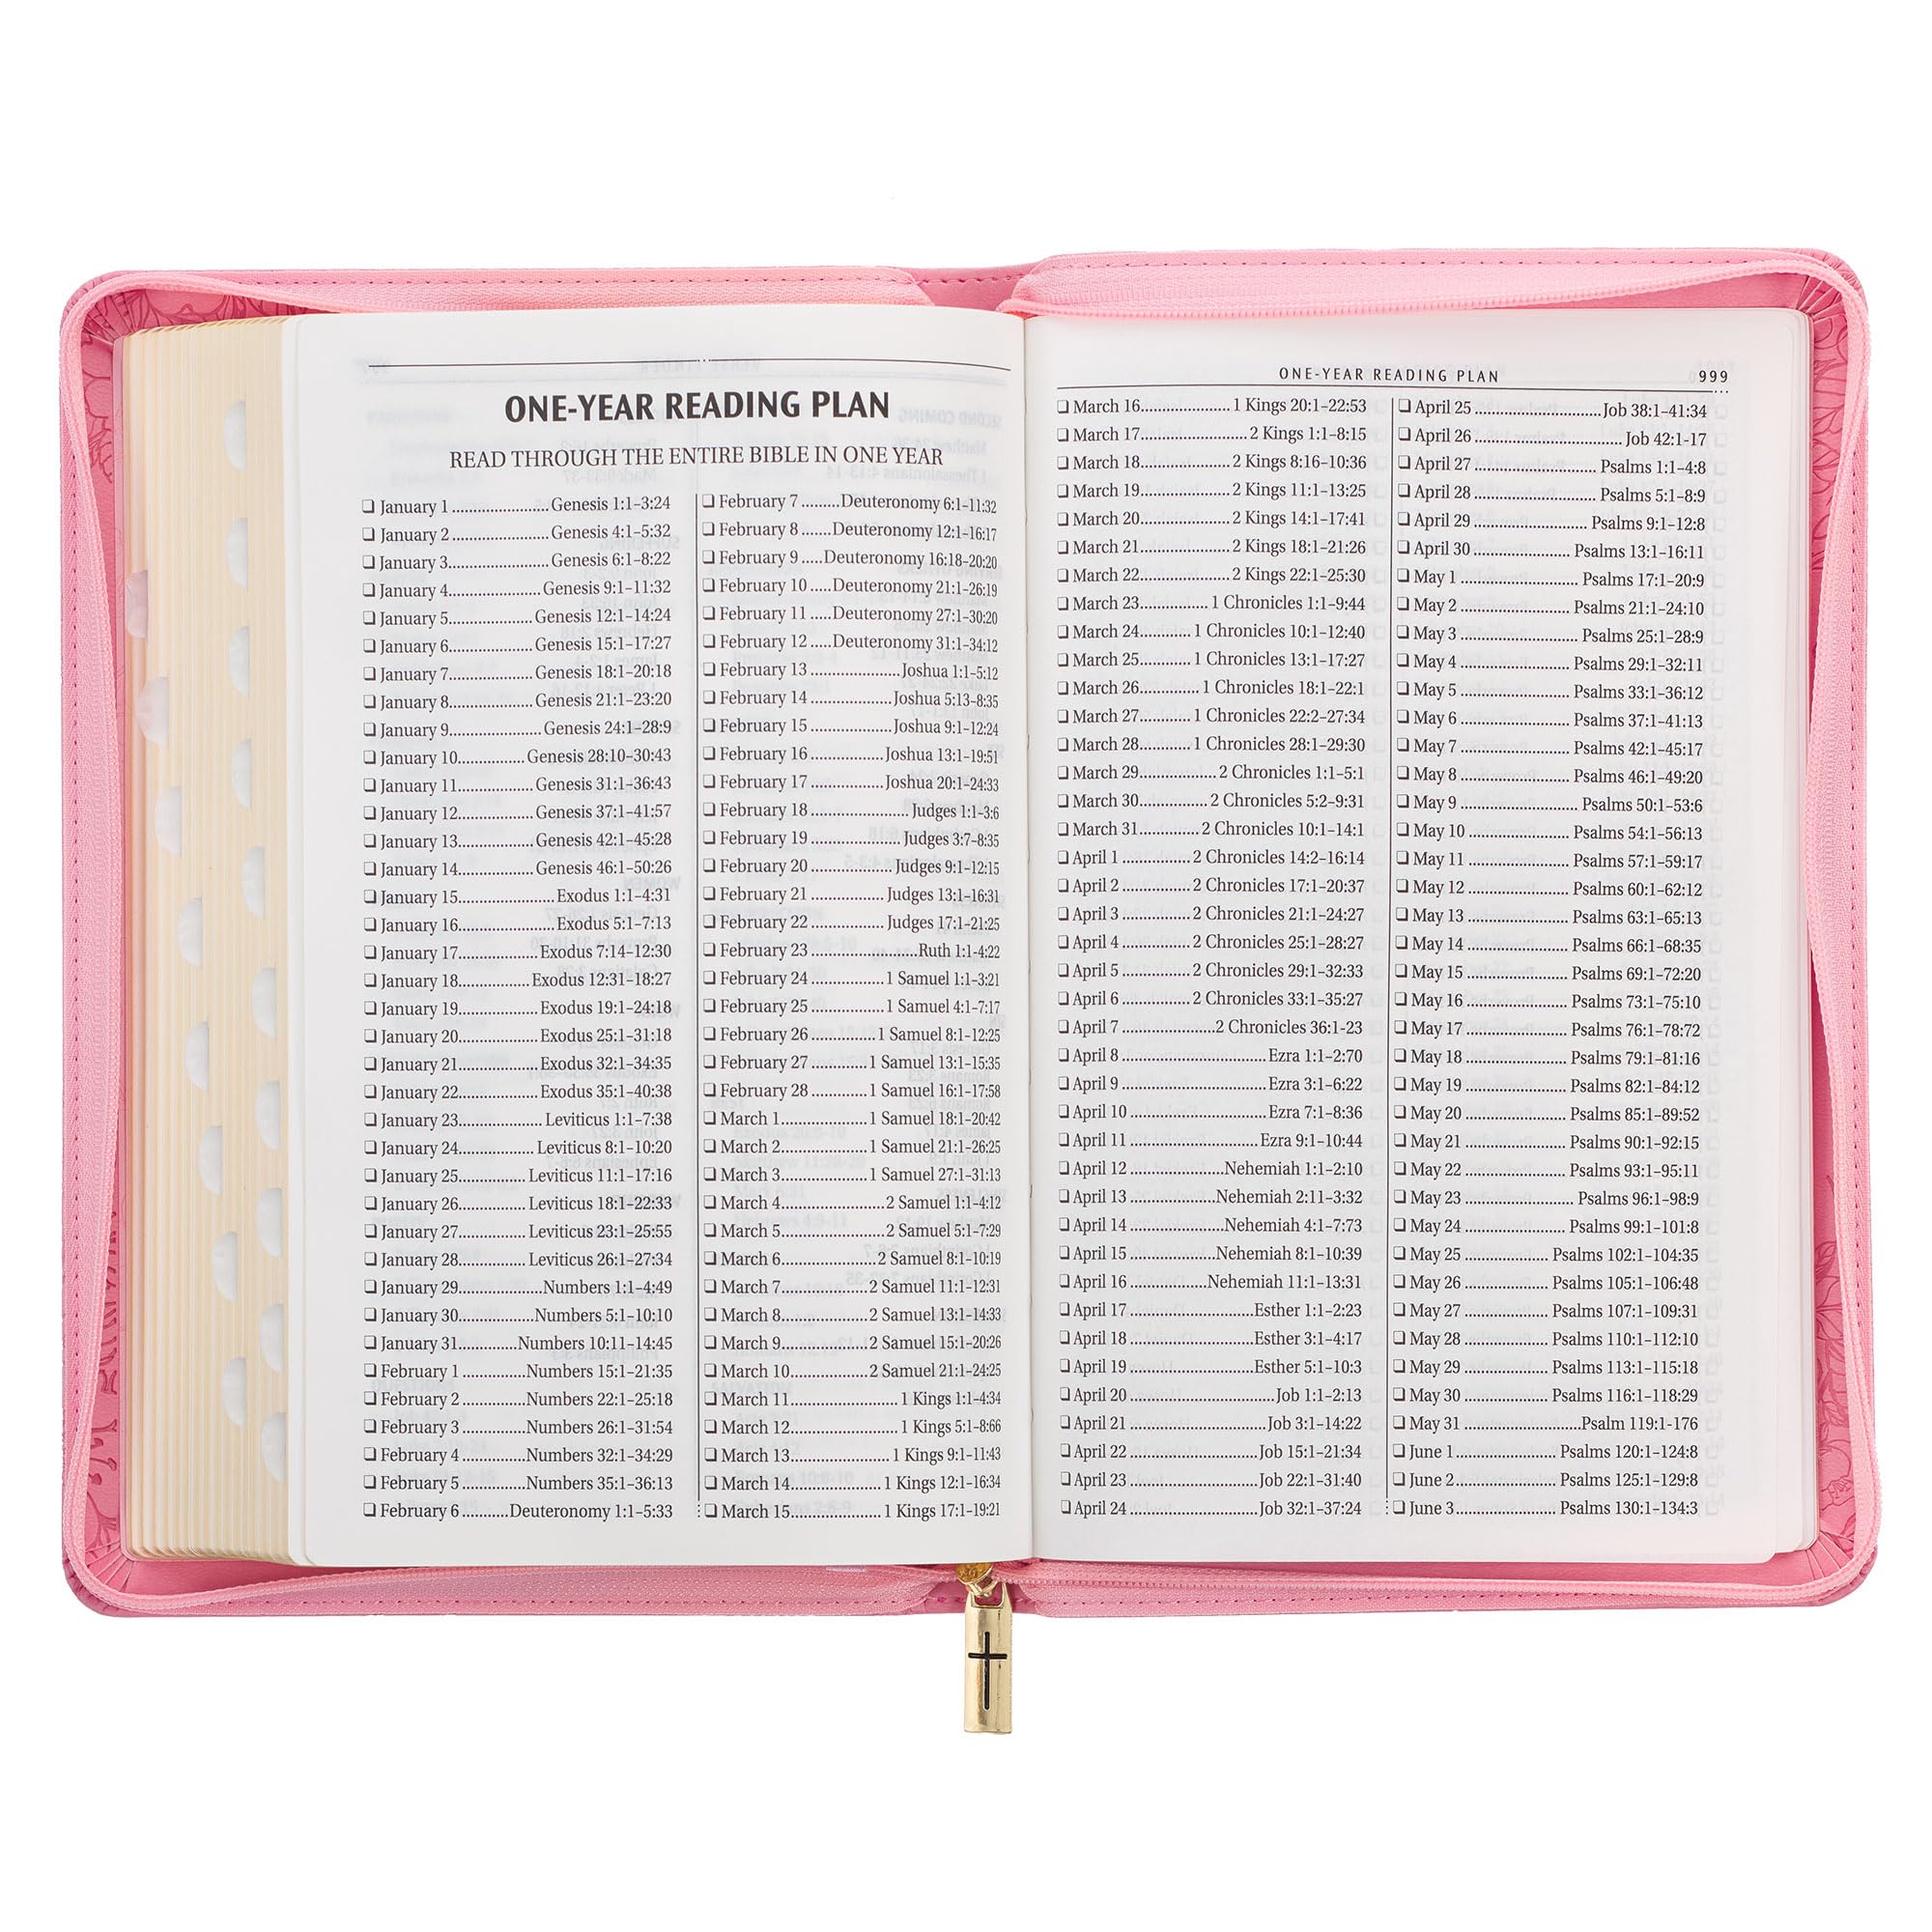 KJV Holy Bible, Standard Size Faux Leather Red Letter Edition Thumb Index, Ribbon Marker, King James Version, Pink Floral Zipper Closure